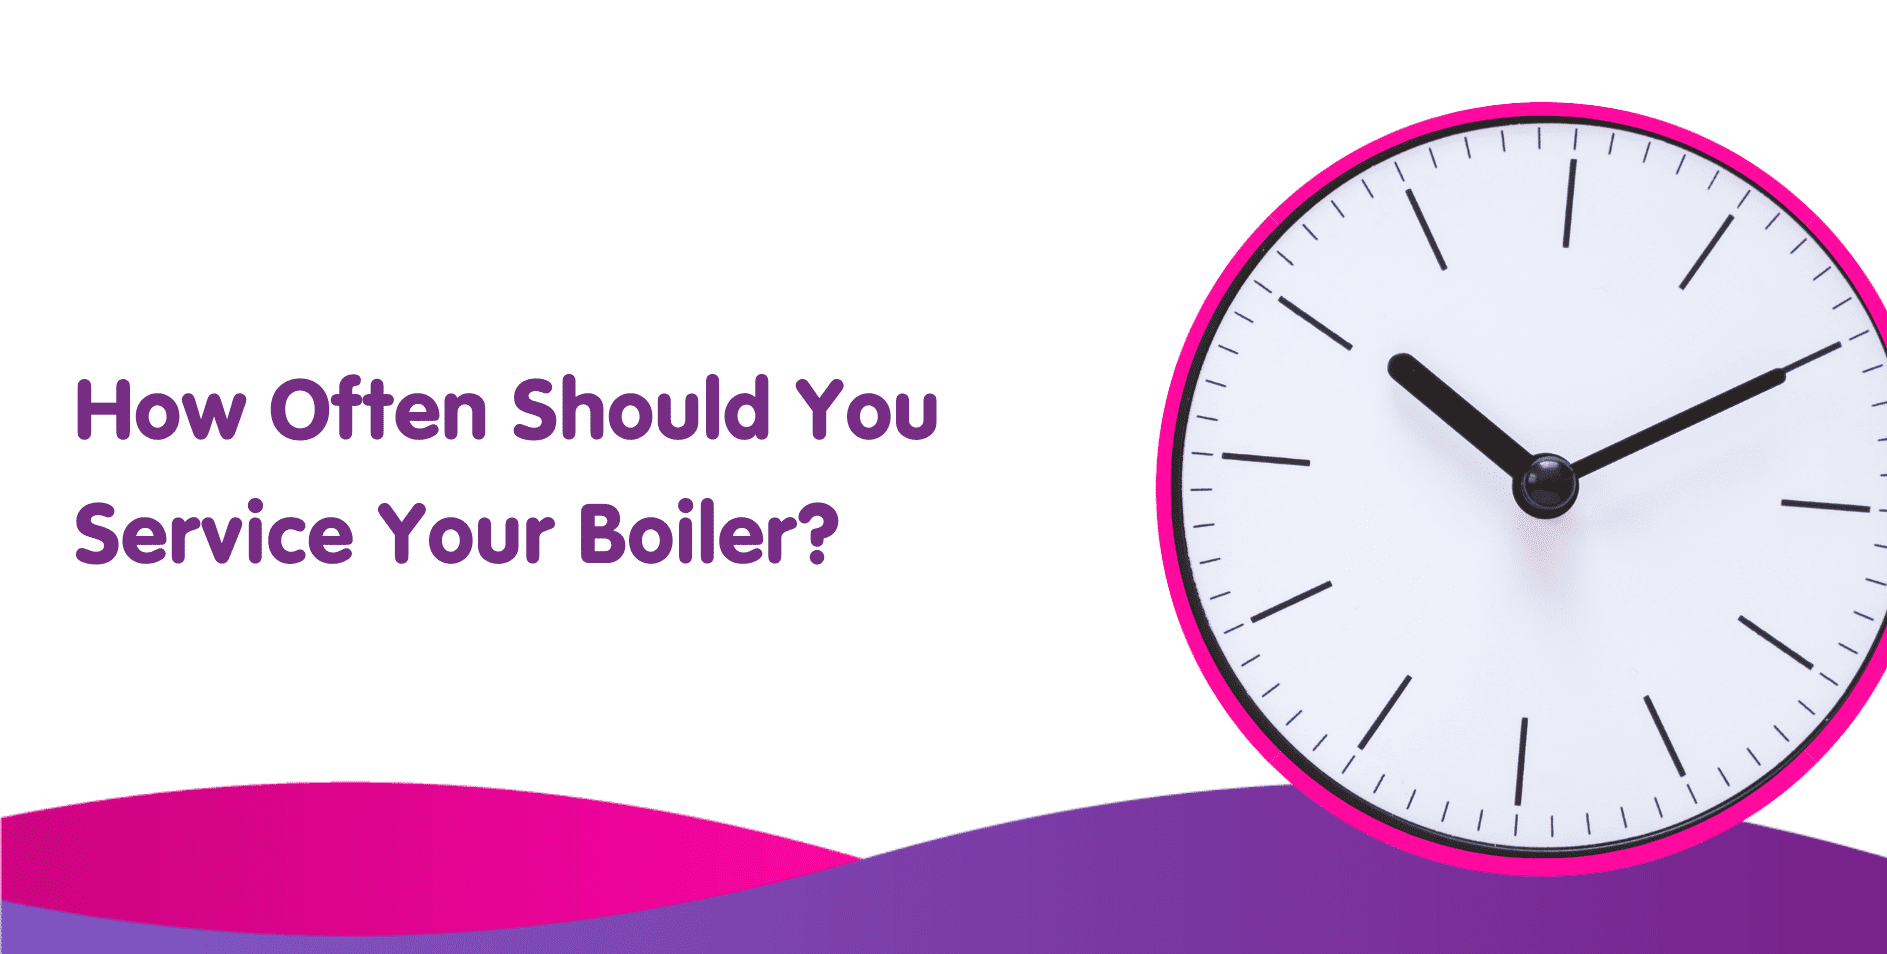 How Often Should You Service Your Boiler?